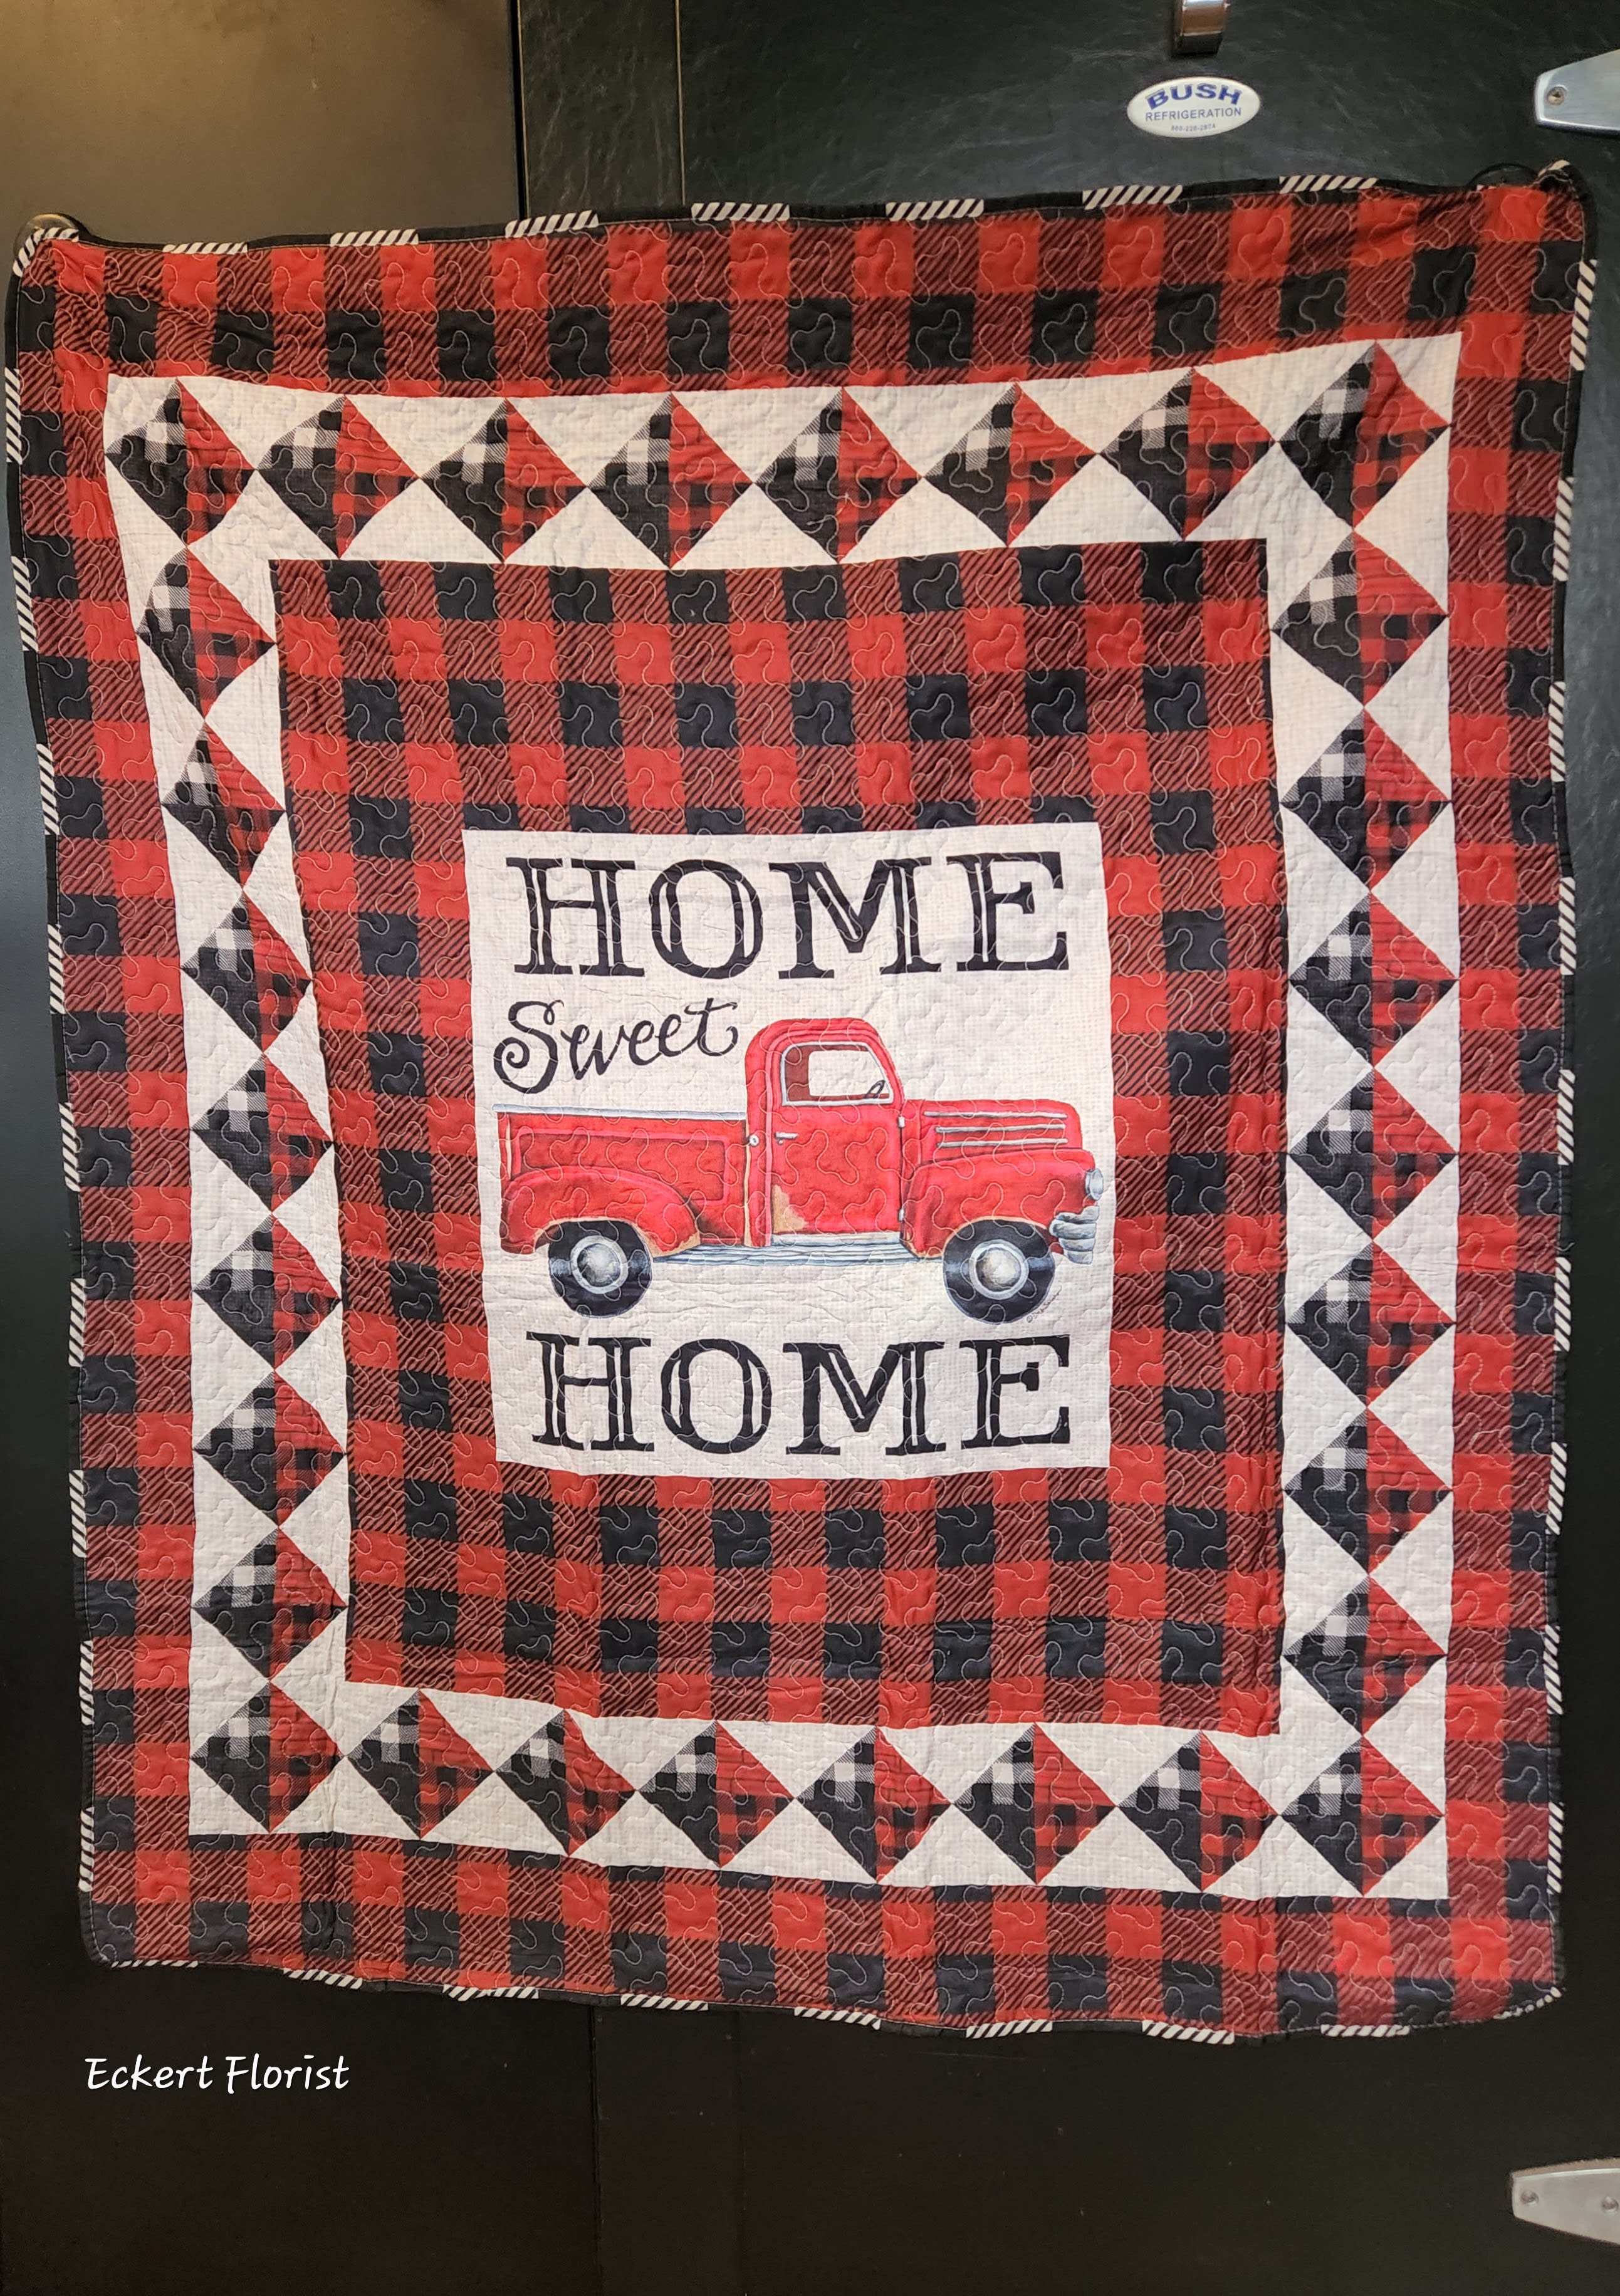 Eckert Florist's Home Sweet Home Red Truck Quilted Throw - Home Sweet Home Red Truck Reversible Soft Quilted Throw Blanket 50x60 inch. Back side is black and white buffalo print. *OUR LOCAL DELIVERY ONLY